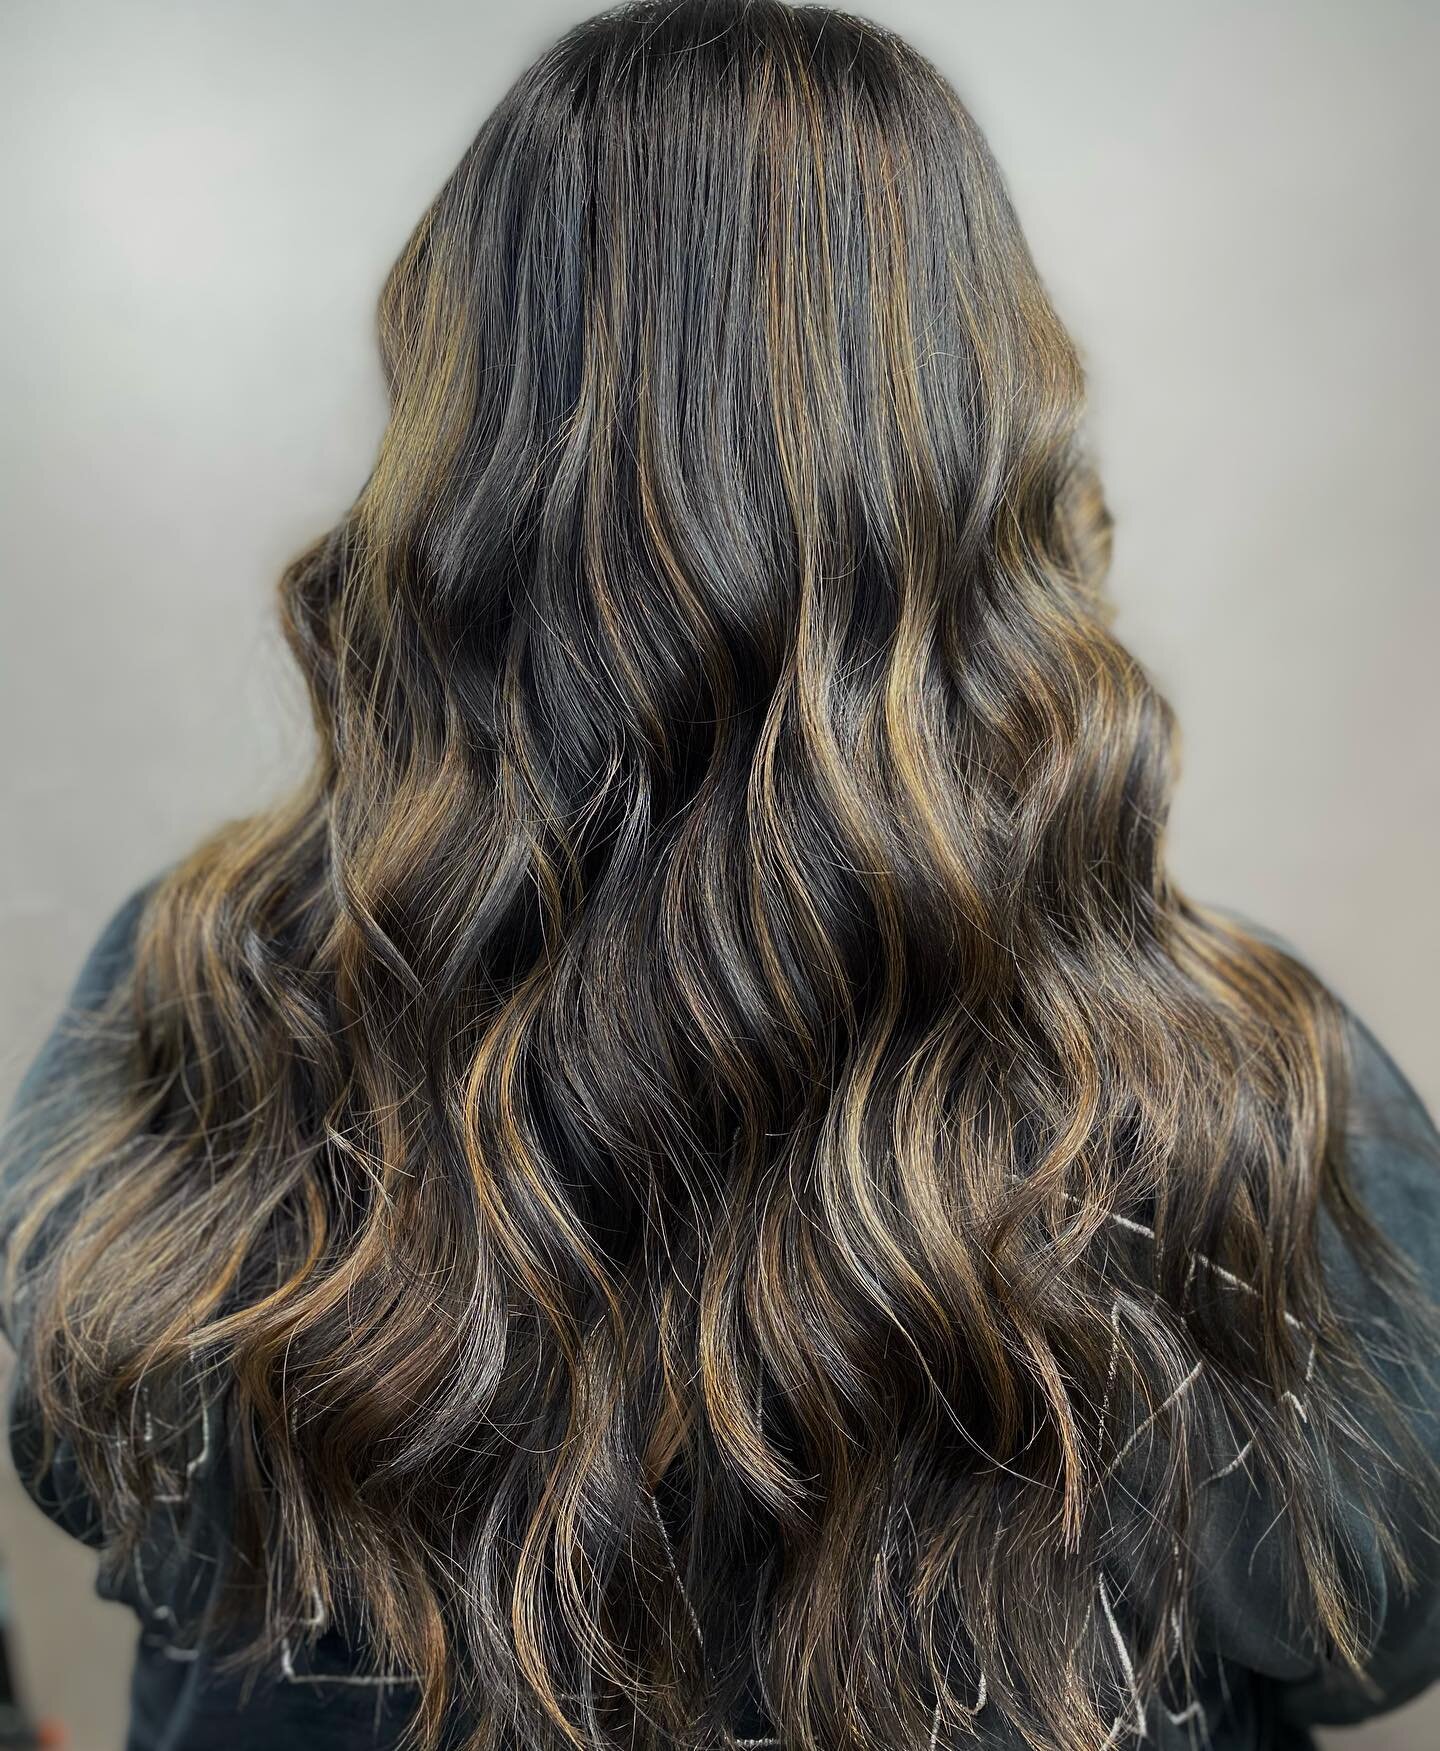 Effortlessly chic: Embracing the low-maintenance beauty of ribbony balayage. 💁&zwj;♀️✨ #HairMagic #marylandhairstylist #linthicumheights #annearundelcounty